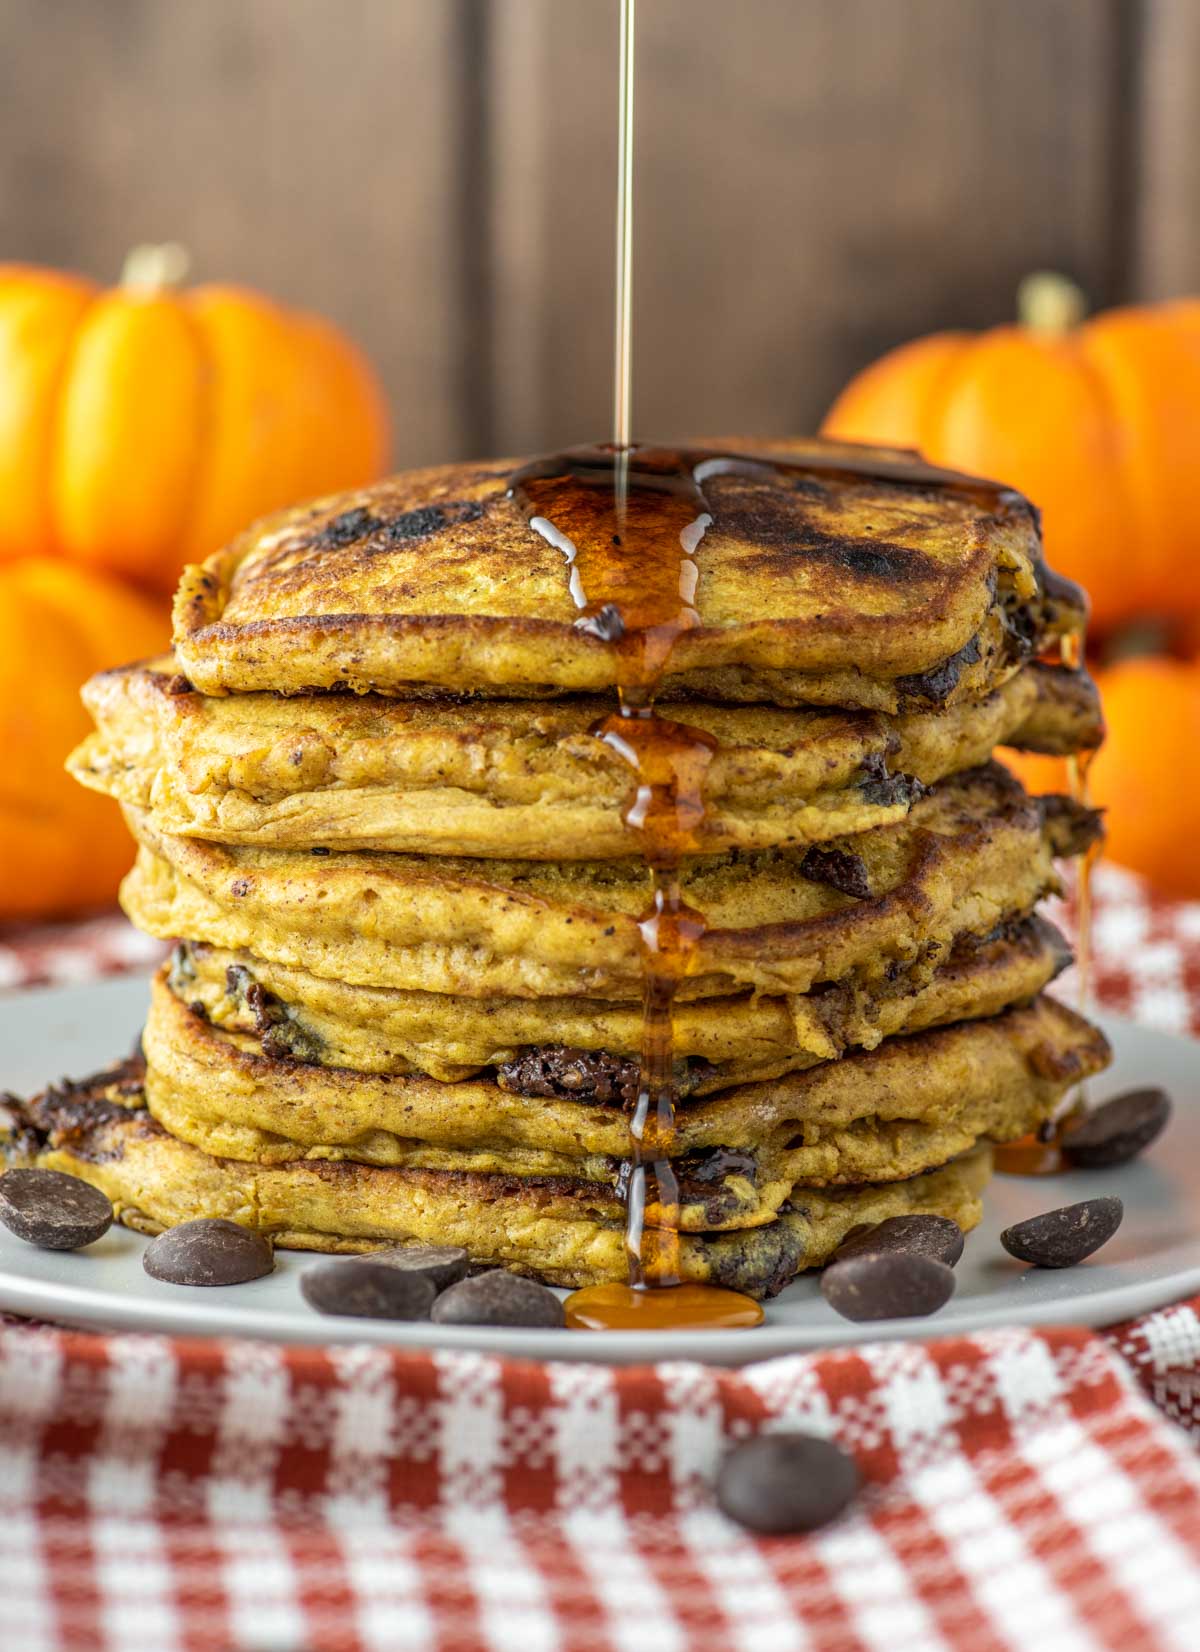 maple syrup being drizzled on stack of pumpkin chocolate chip pancakes